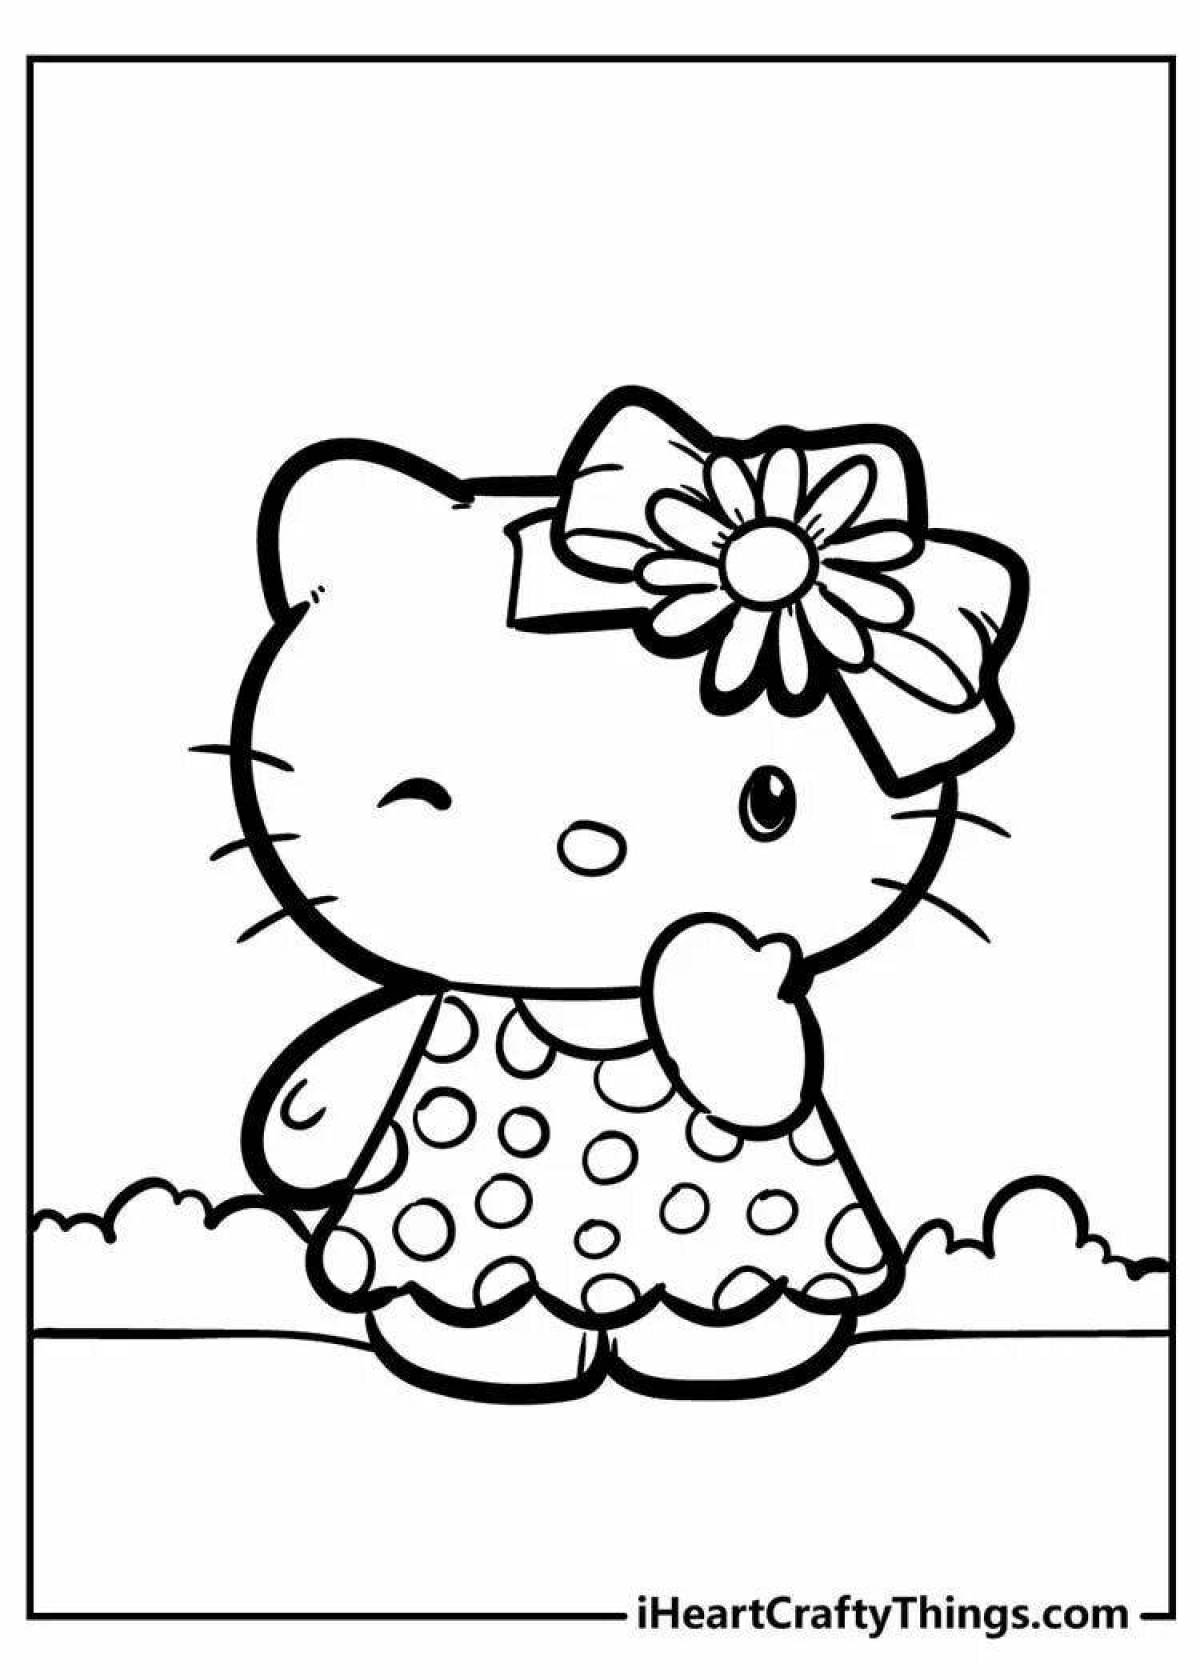 Great hello kitty doll coloring book